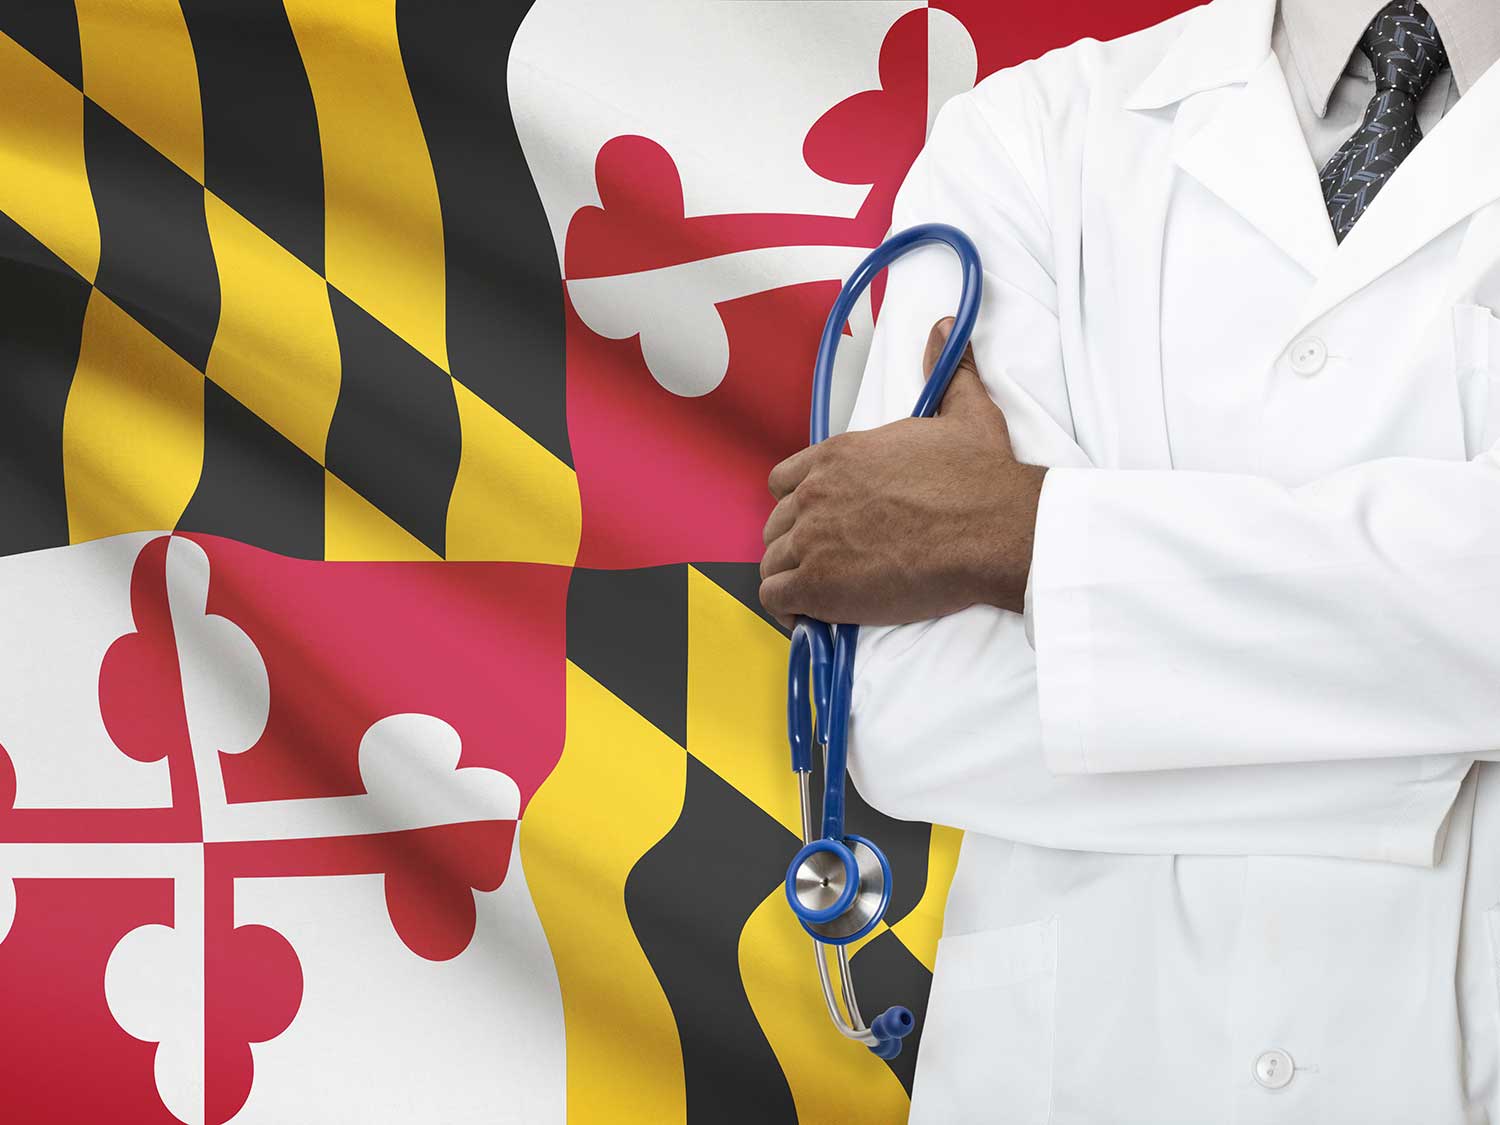 A Physician With A Liability Policy From MEDPLI Standing In Front Of The Maryland Flag